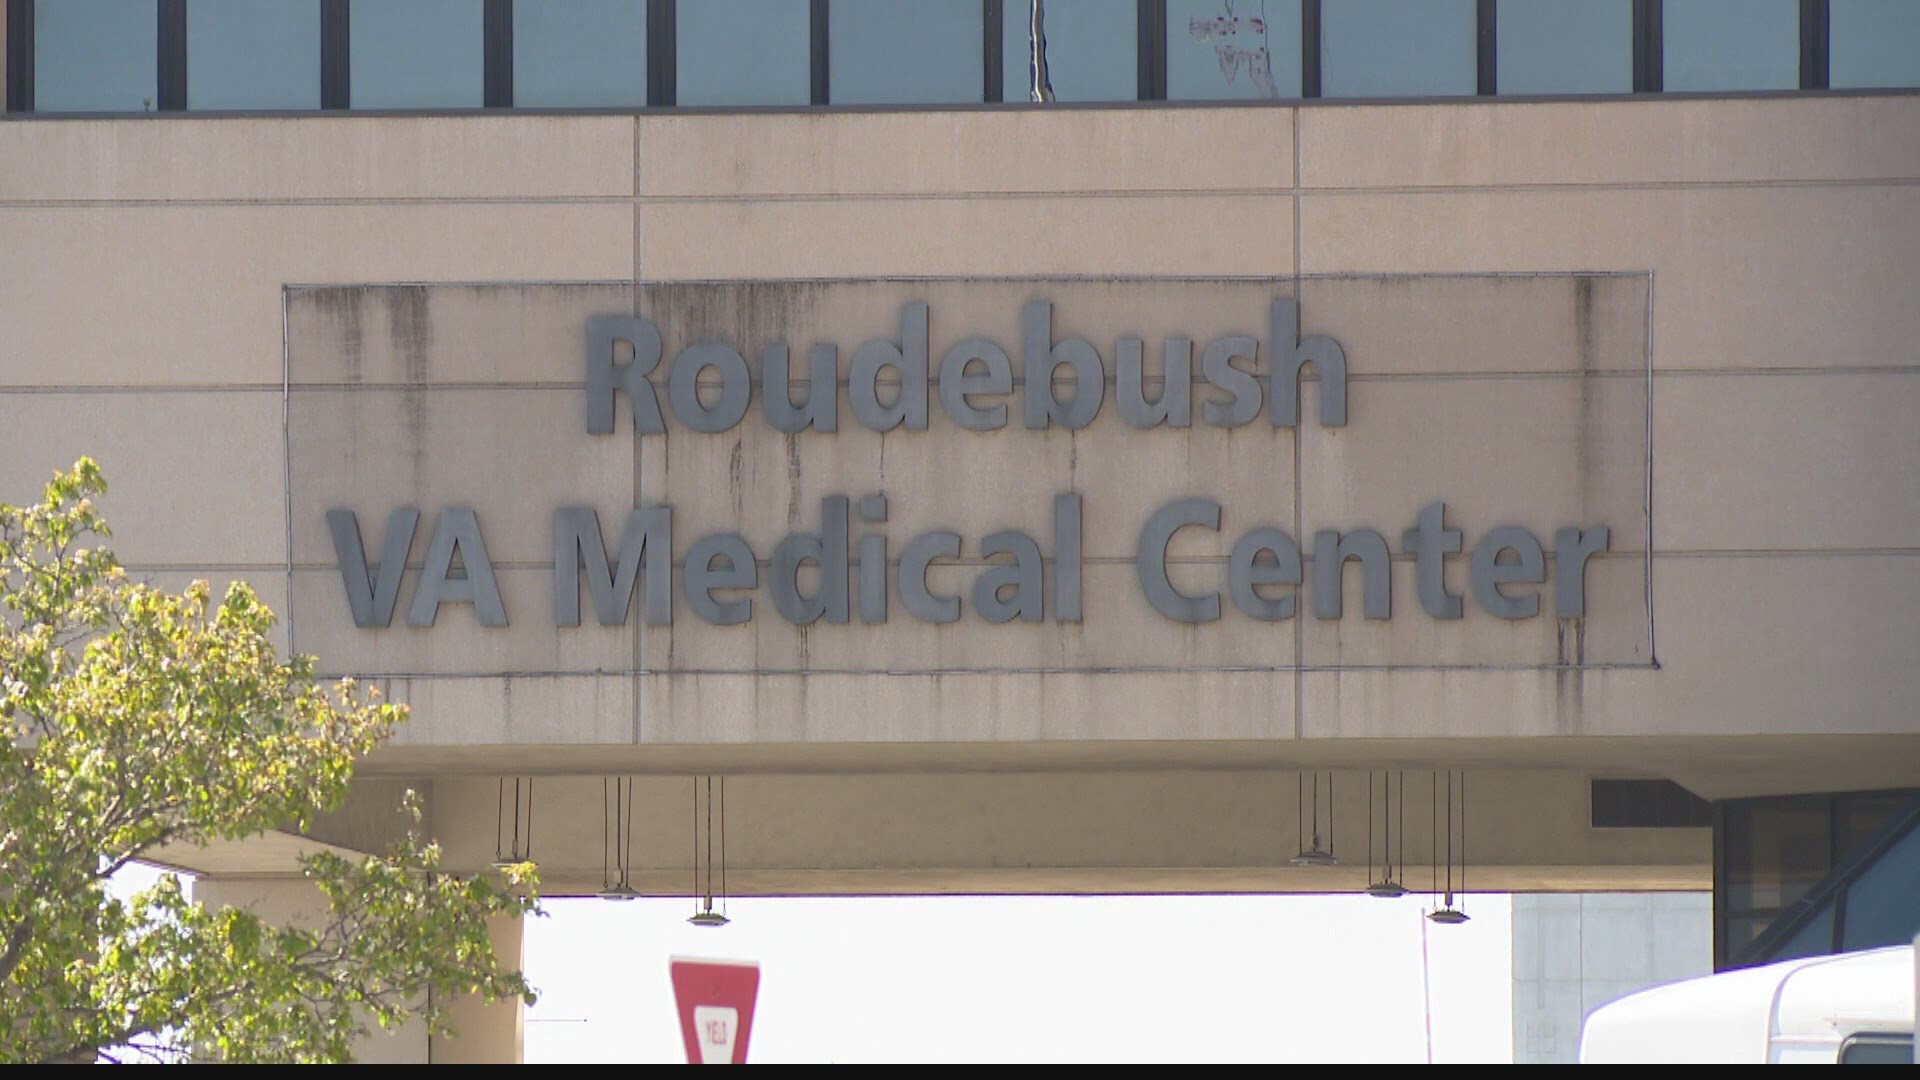 Inspectors from OSHA confirm administrators at the Roudebush facility failed to provide appropriate PPE and failed to protect employees from COVID-19.